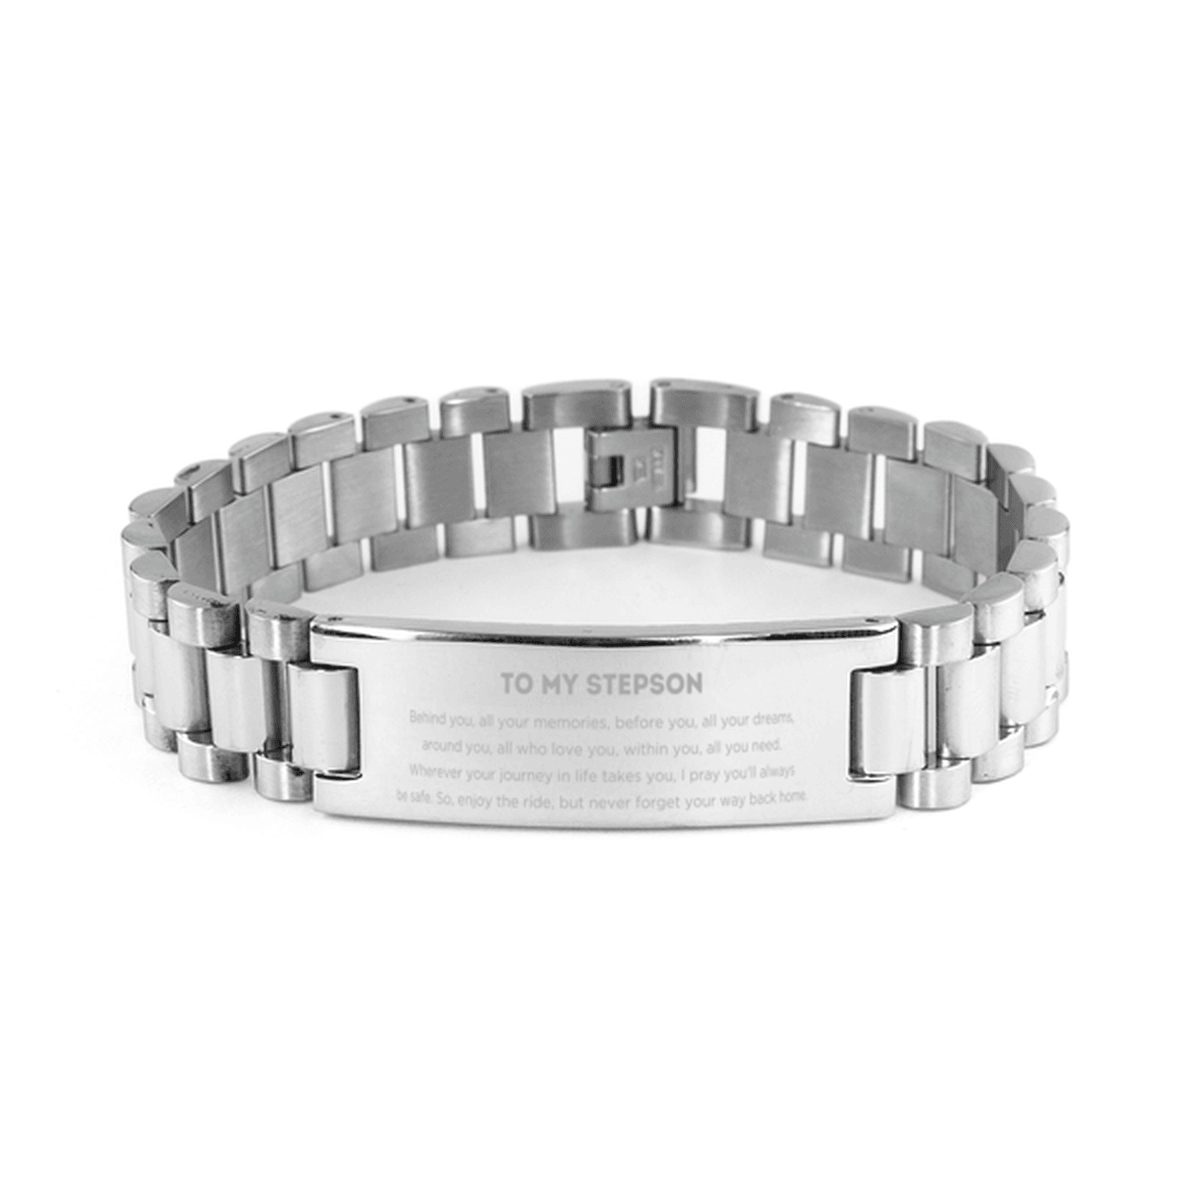 To My Stepson Gifts, Inspirational Stepson Ladder Stainless Steel Bracelet, Sentimental Birthday Christmas Unique Gifts For Stepson Behind you, all your memories, before you, all your dreams, around you, all who love you, within you, all you need - Mallard Moon Gift Shop